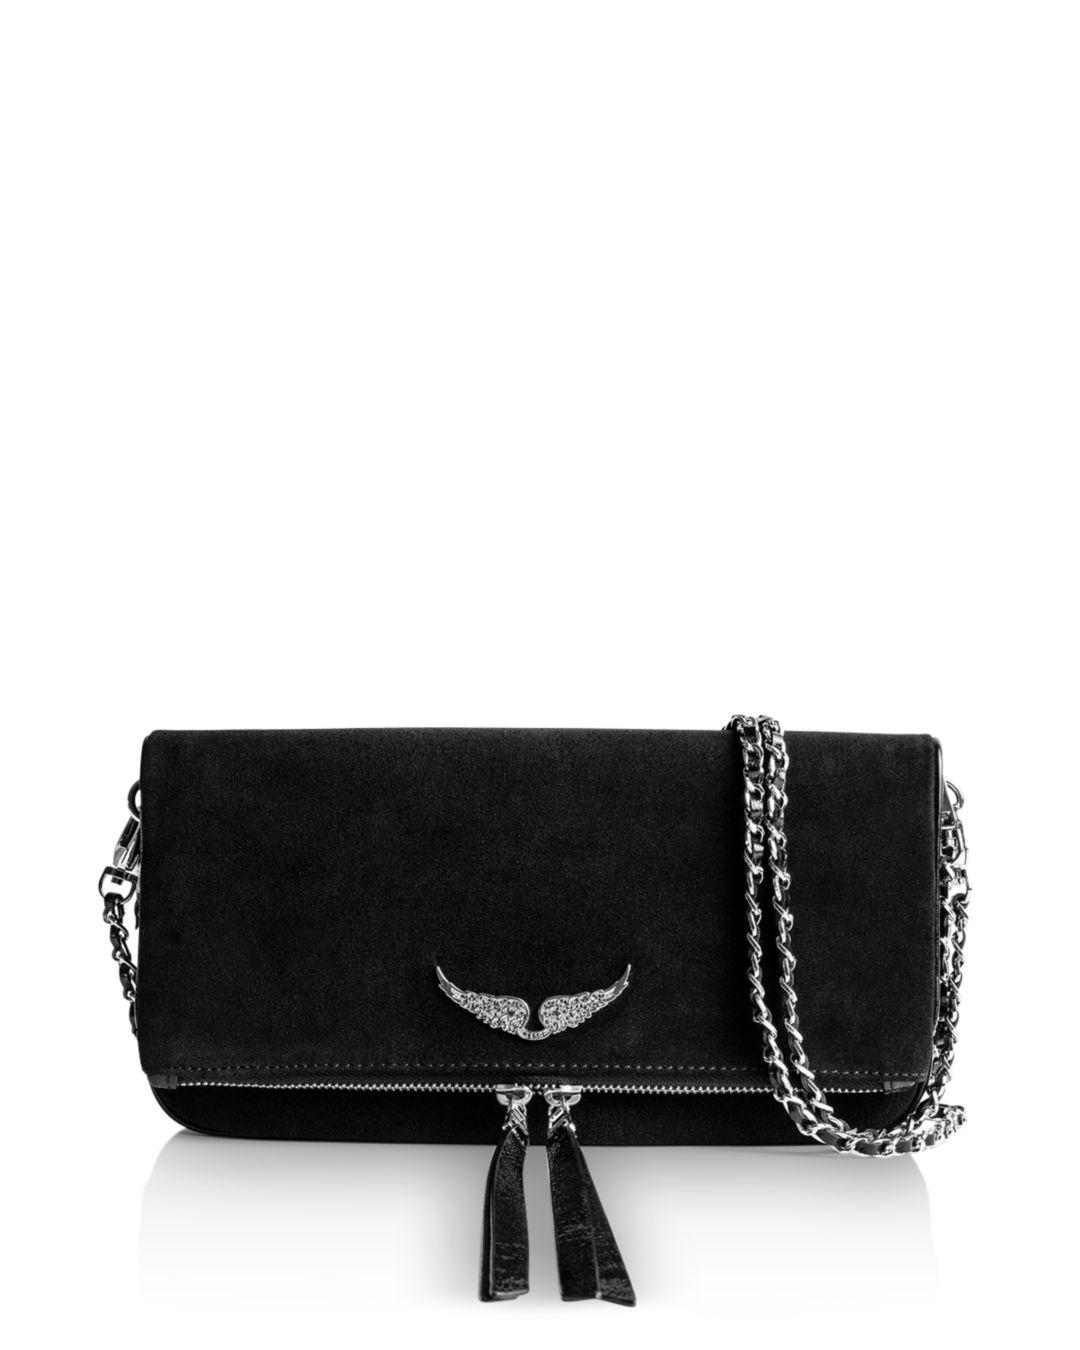 Zadig & Voltaire Leather Rock Grained Clutch in Black - Lyst